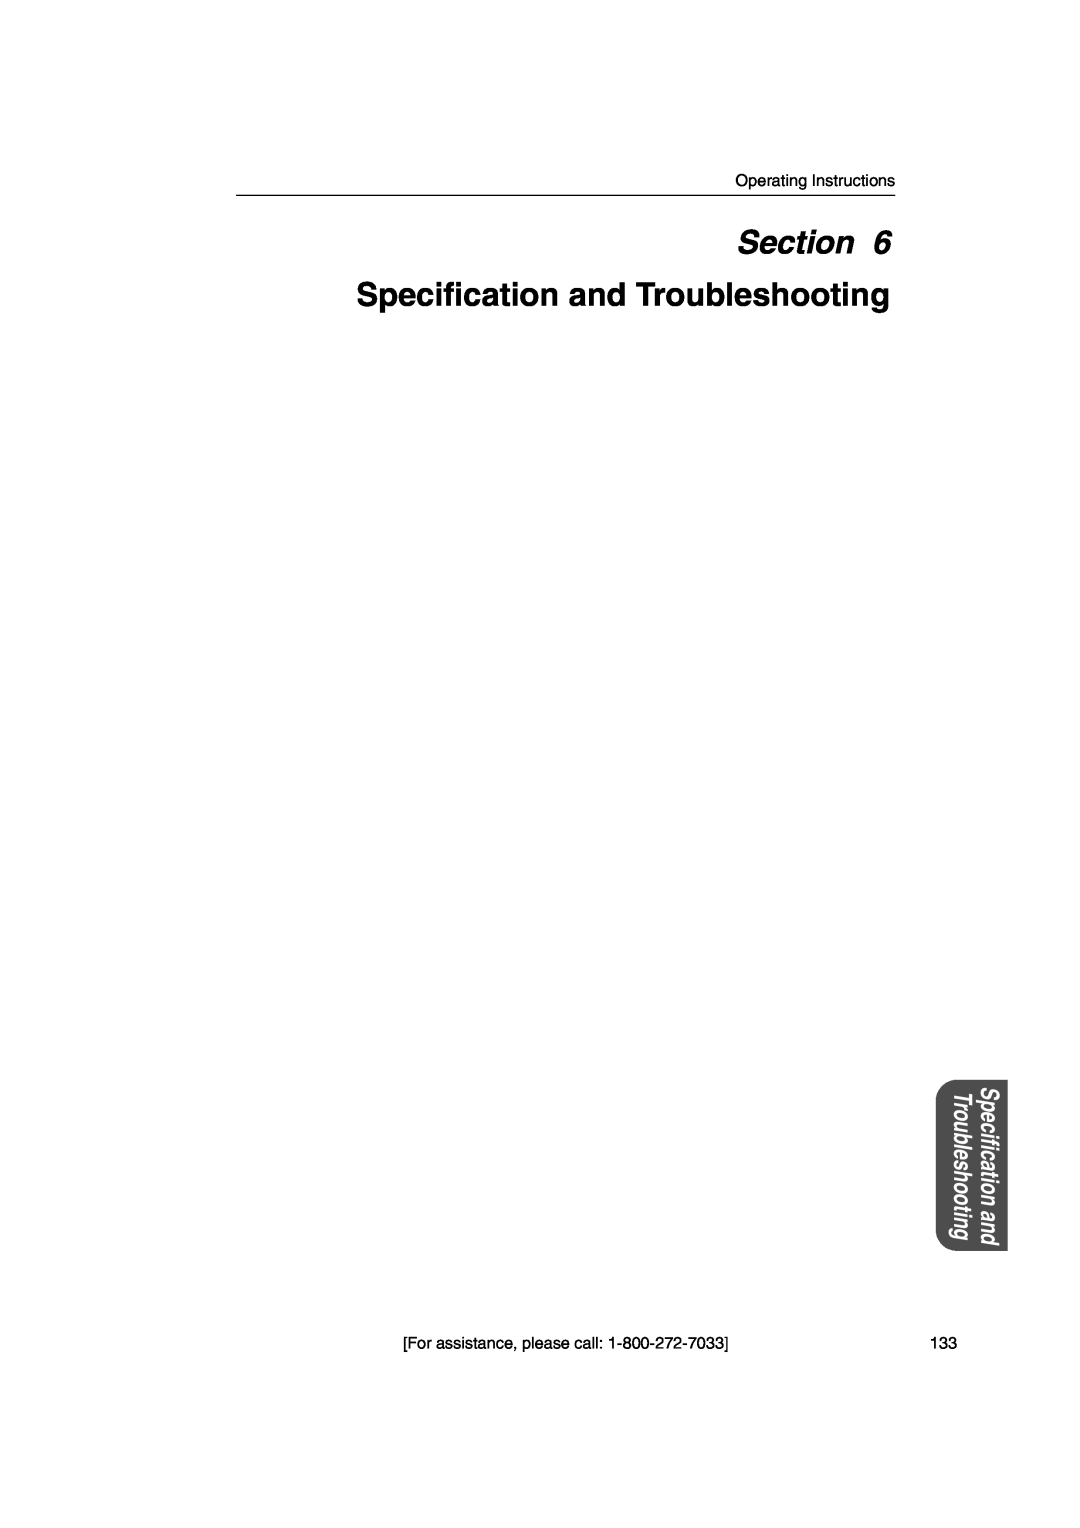 Panasonic KX-HGW600 manual Specification and Troubleshooting, Section 